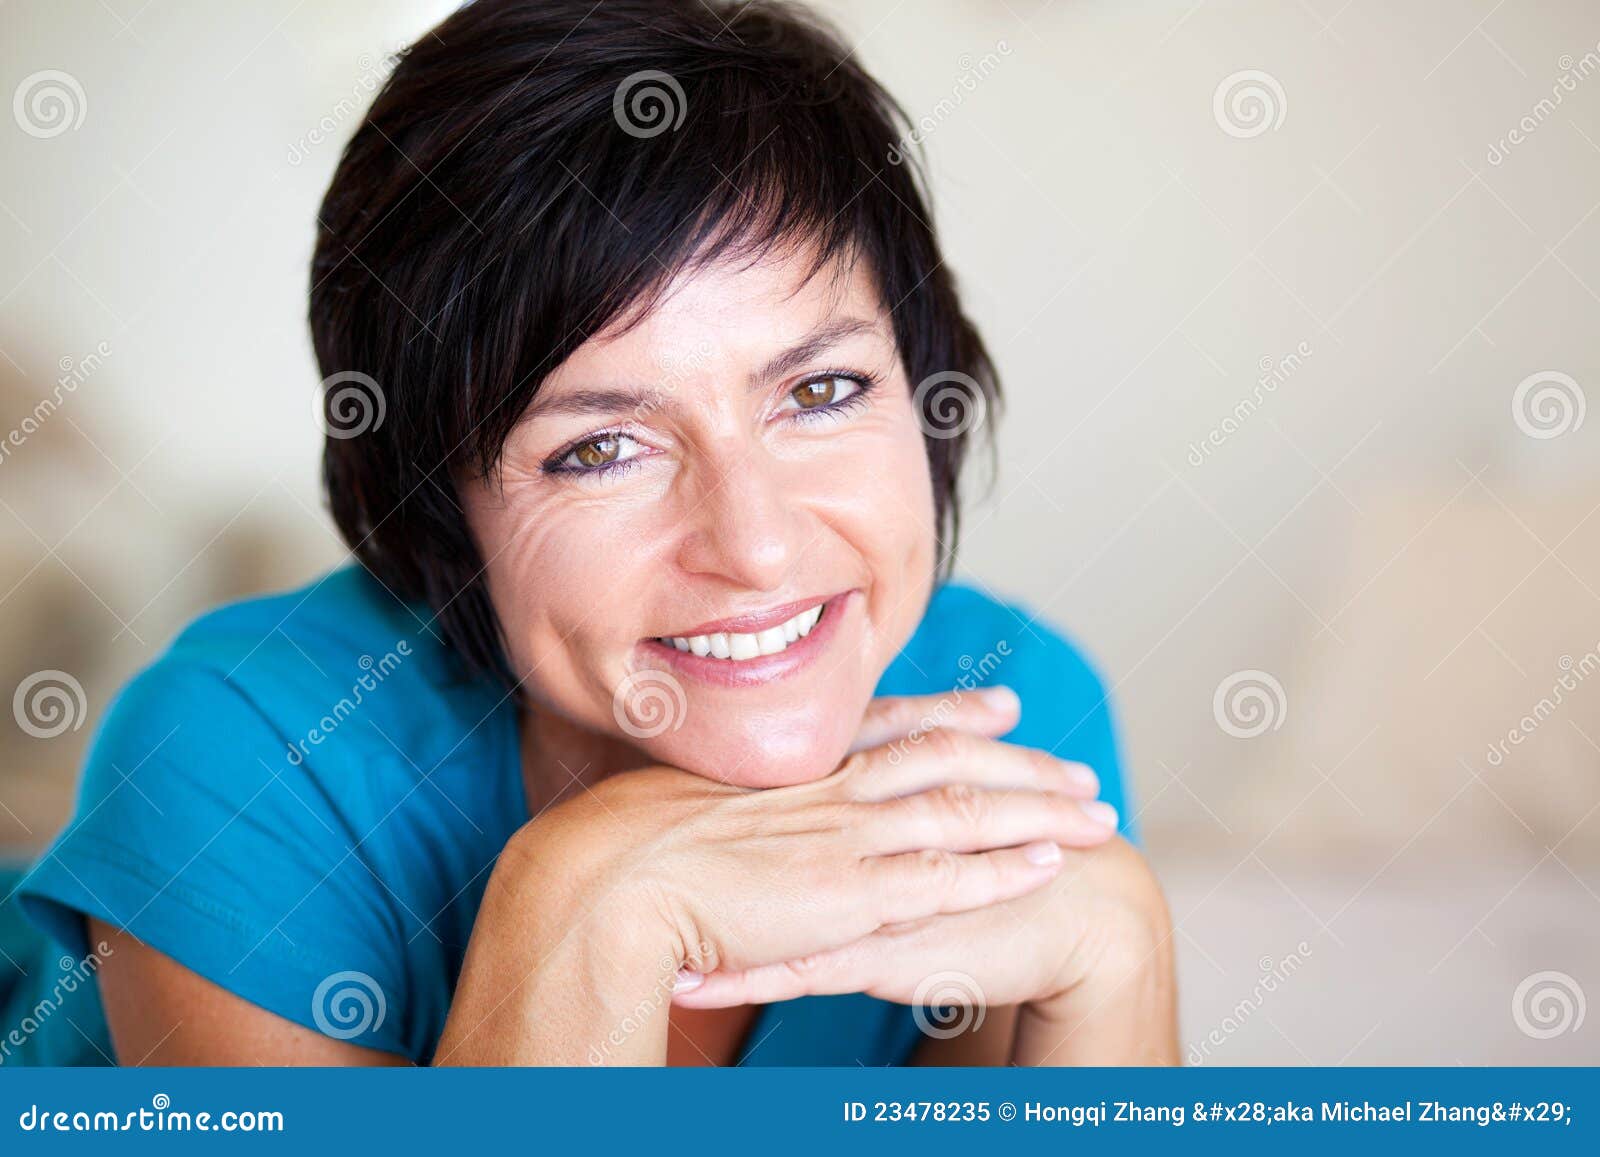 Middle aged lady stock image. Image of casual, aged, mature - 23478235